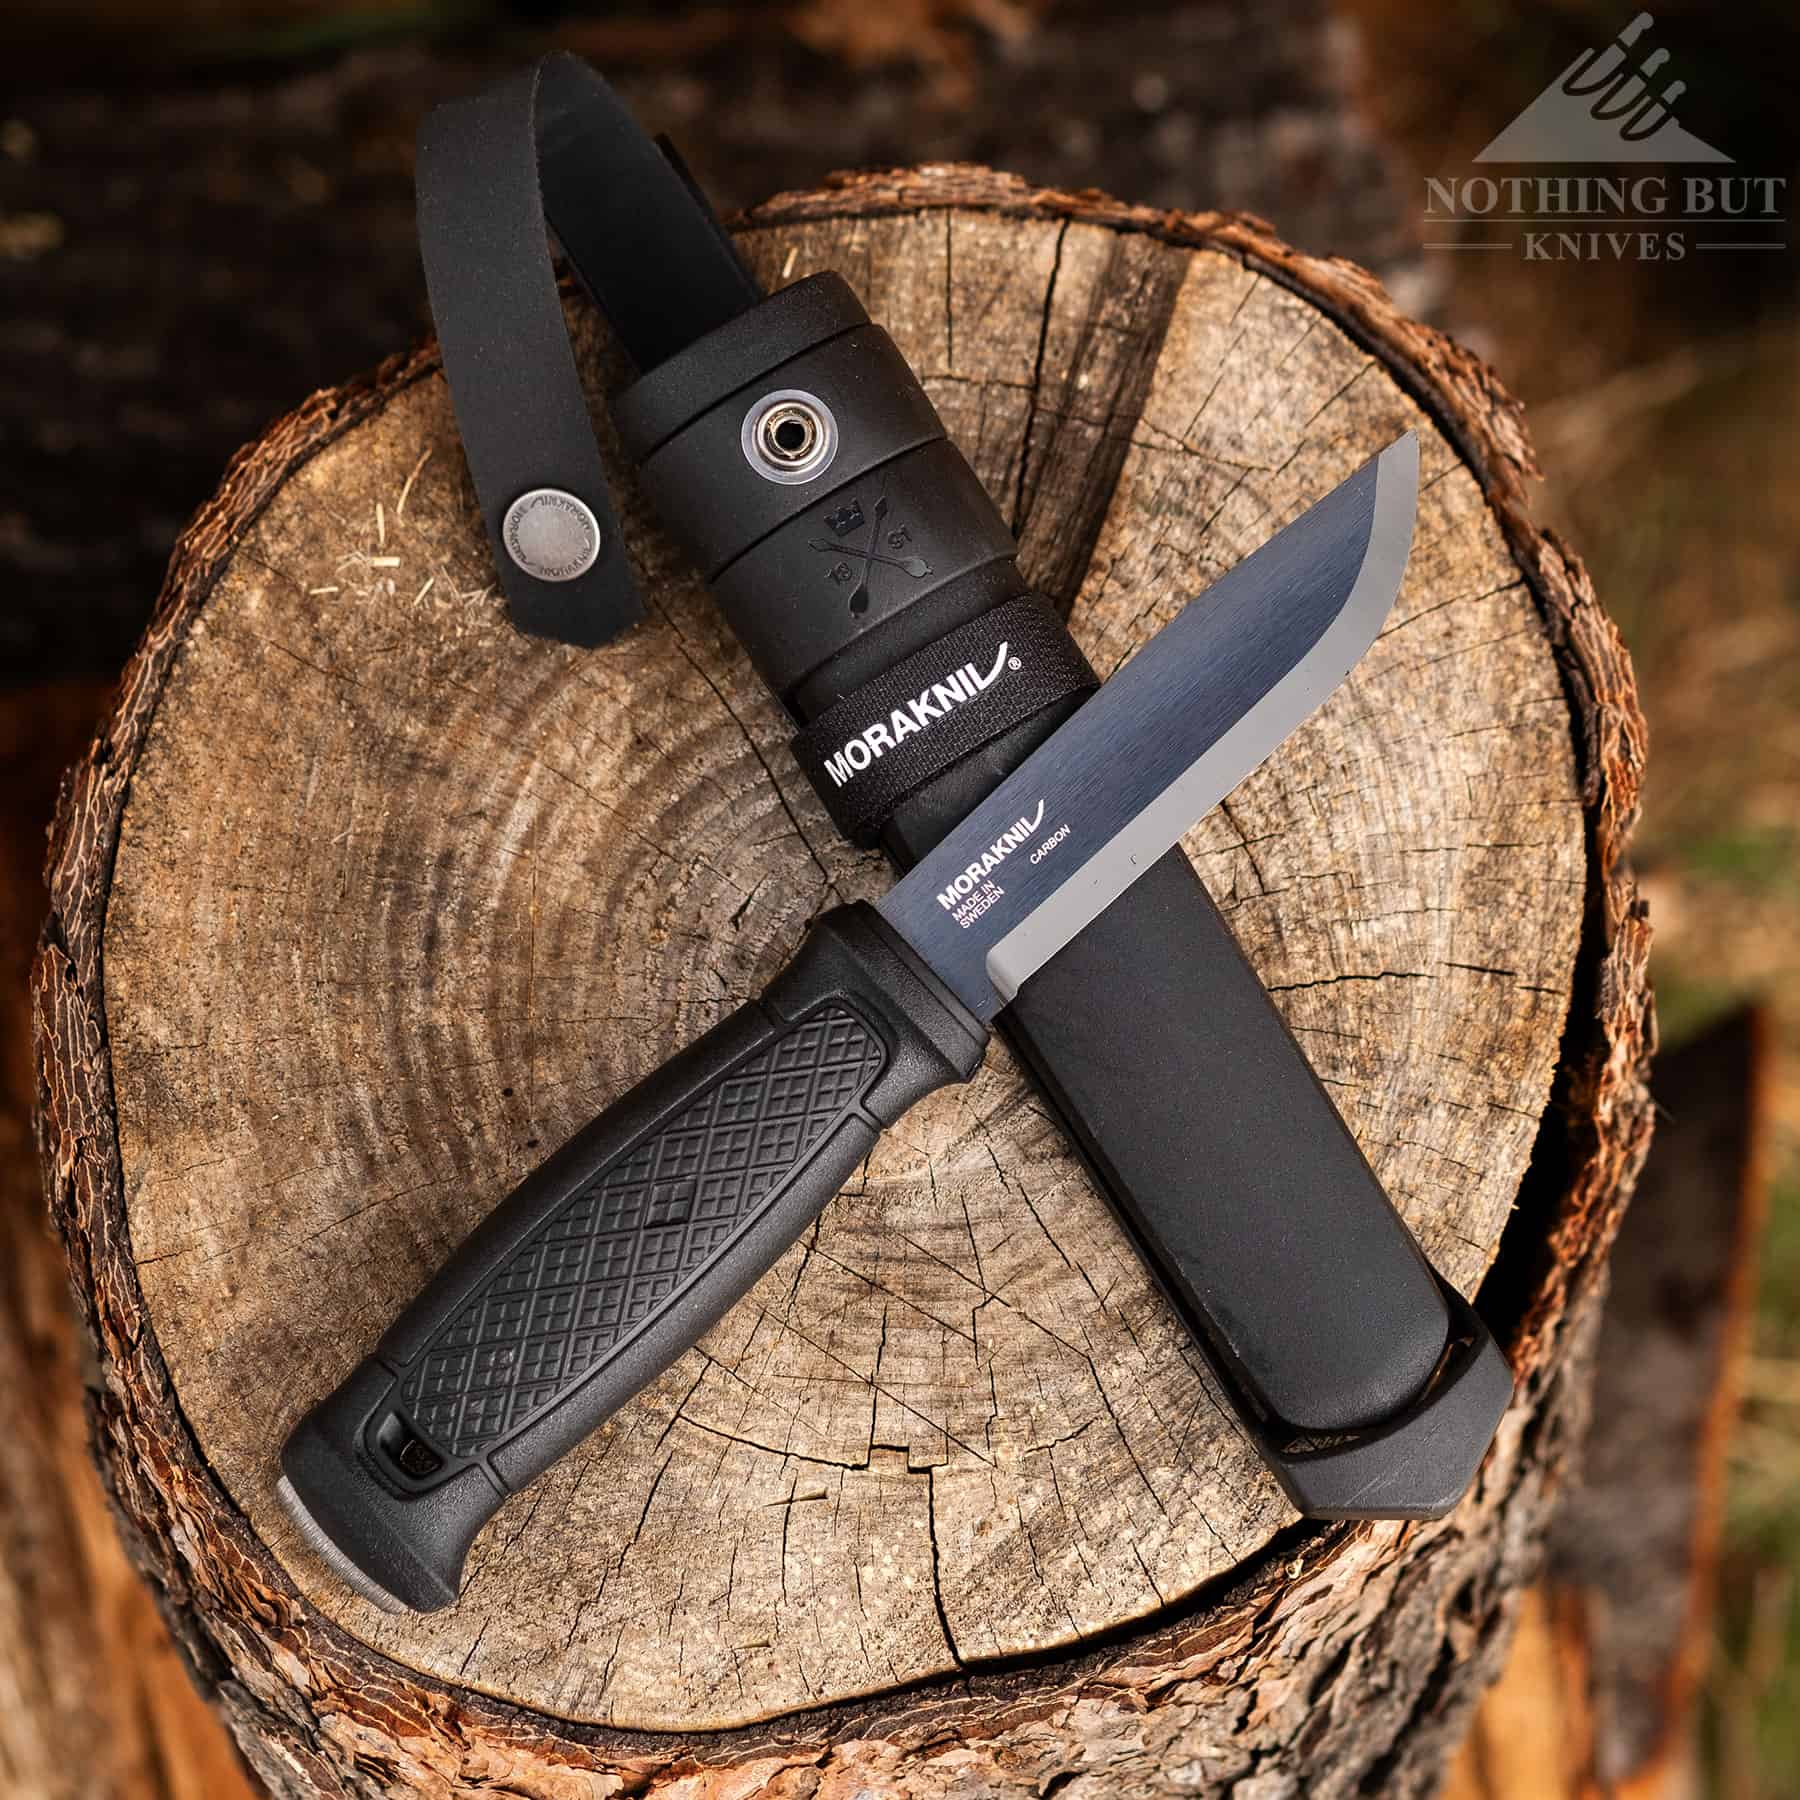 Morakniv Garberg knives are accompanied by a host of modular features that make them even better for their use in the woods.